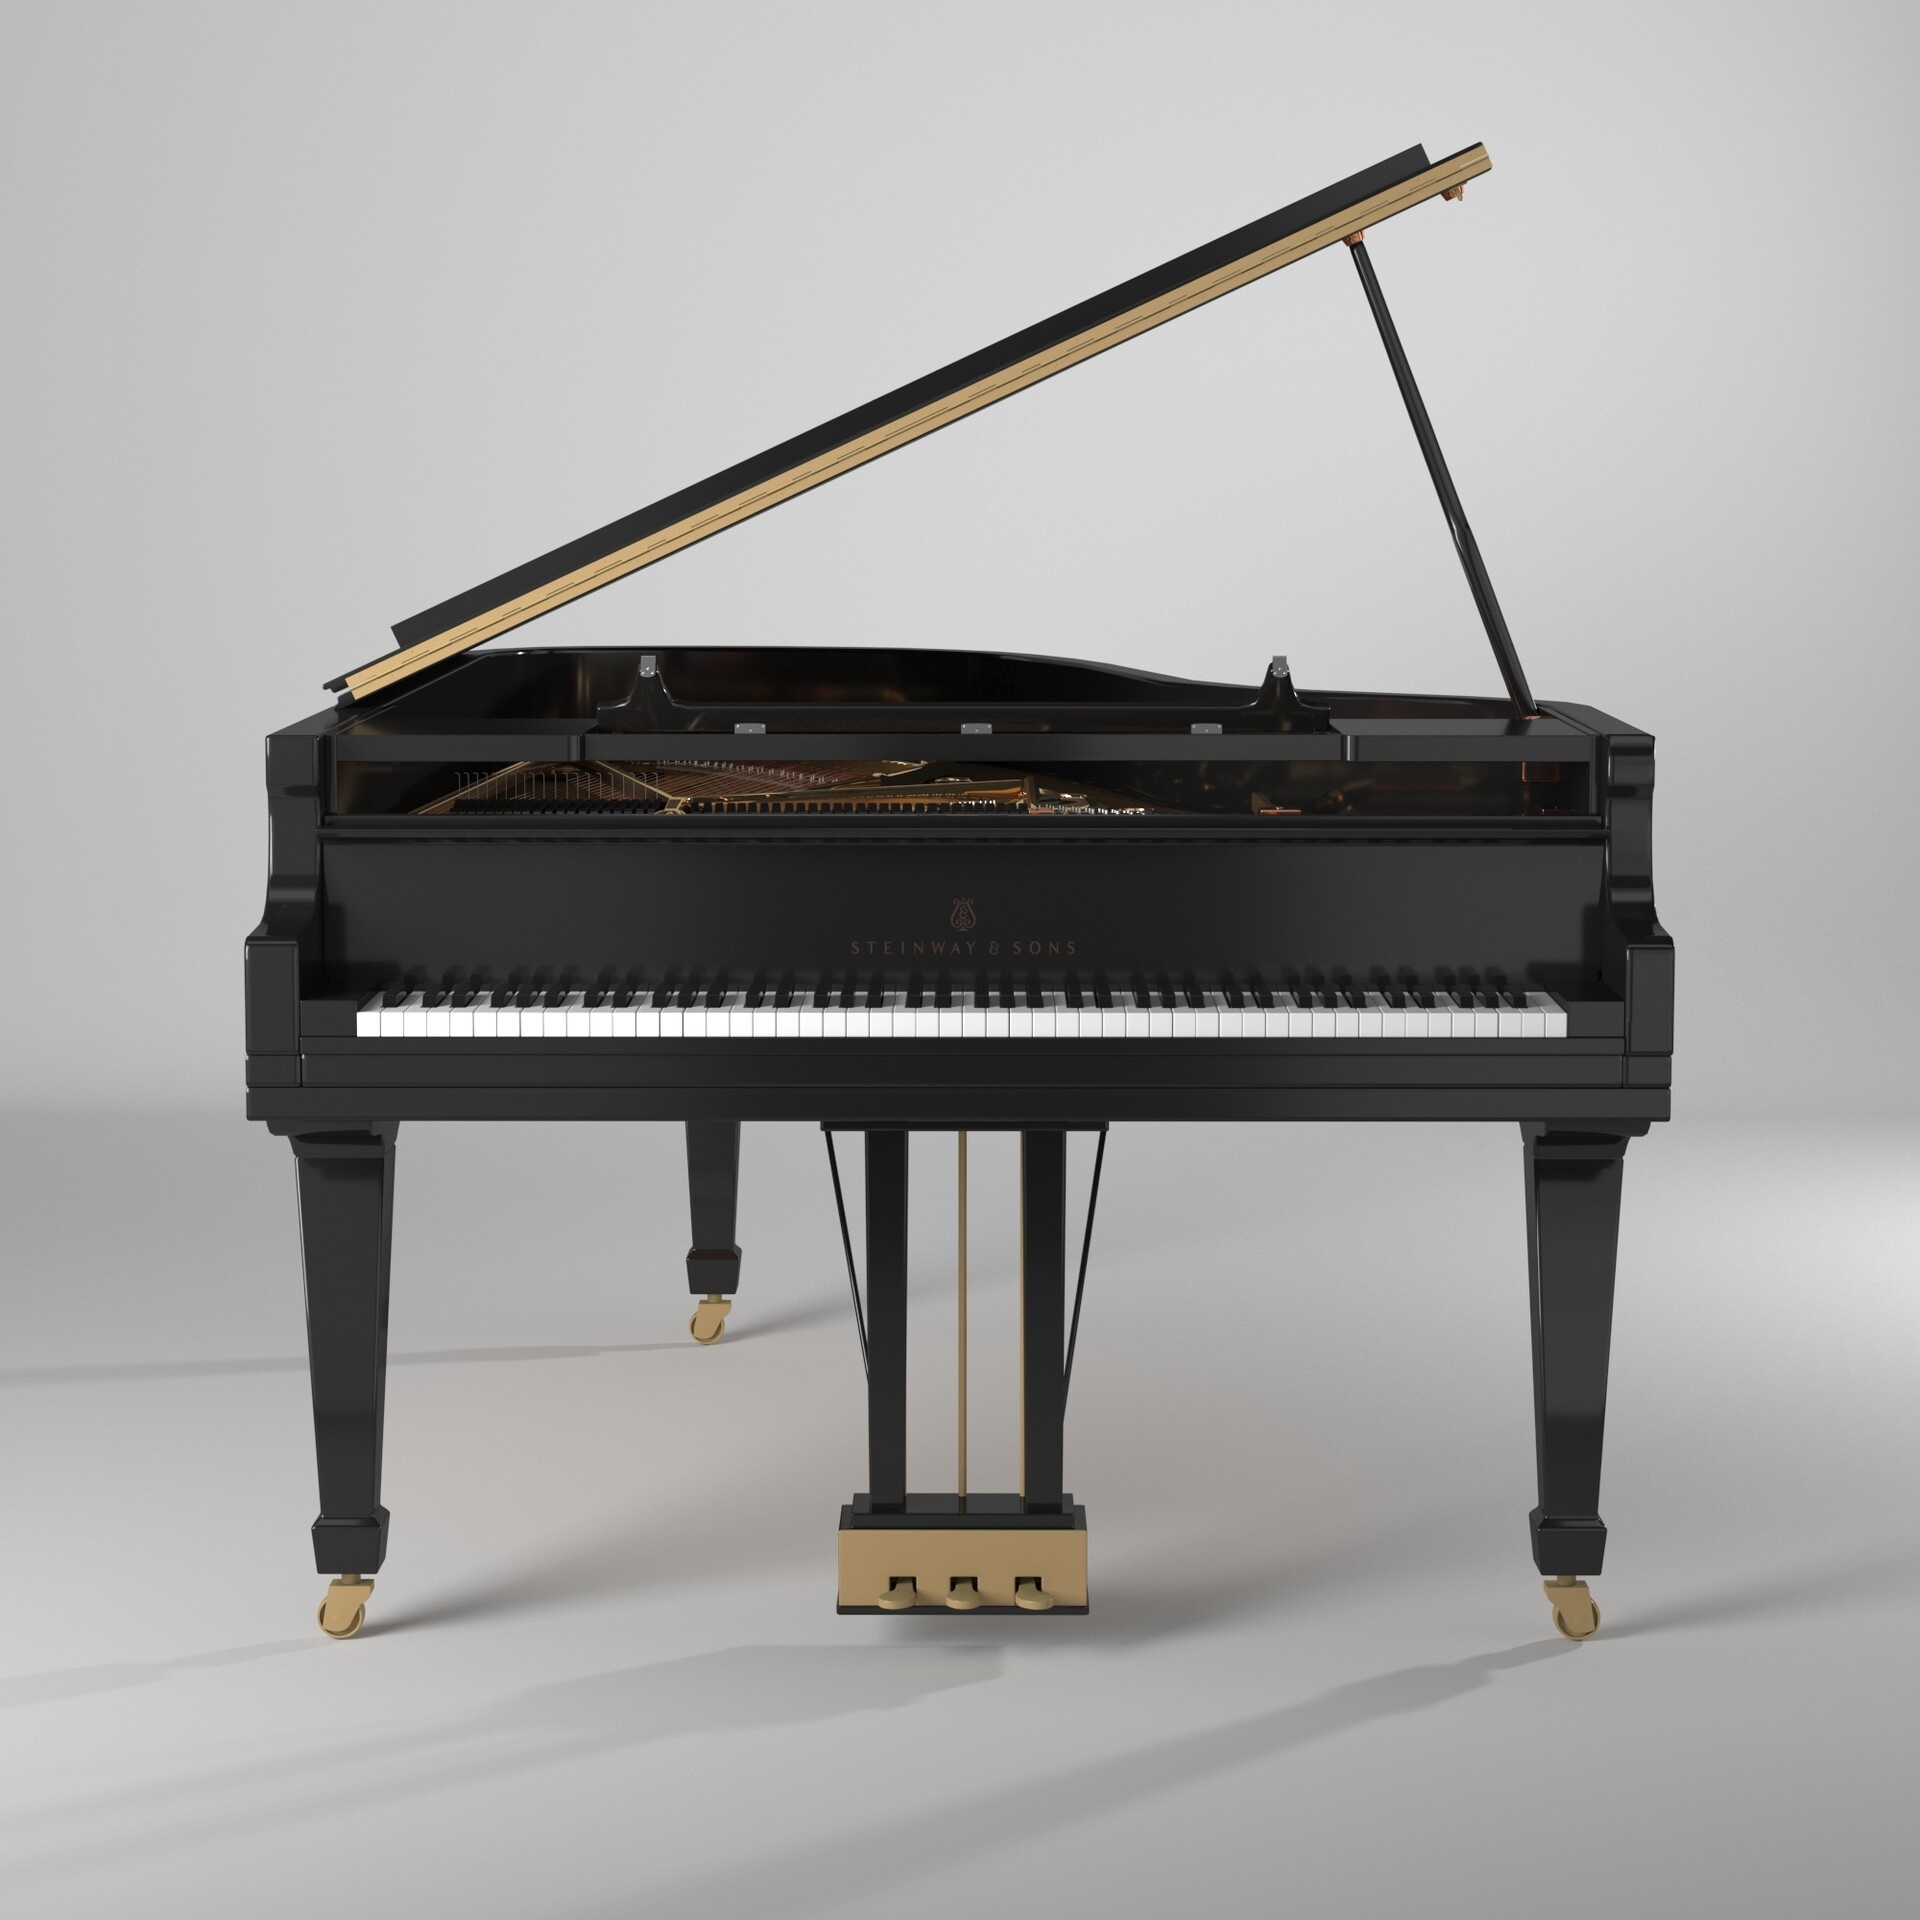 Fortepiano: Steinway And Sons, A German-American Piano Company, Founded By German Piano Builder Heinrich Engelhard Steinweg. 1920x1920 HD Wallpaper.